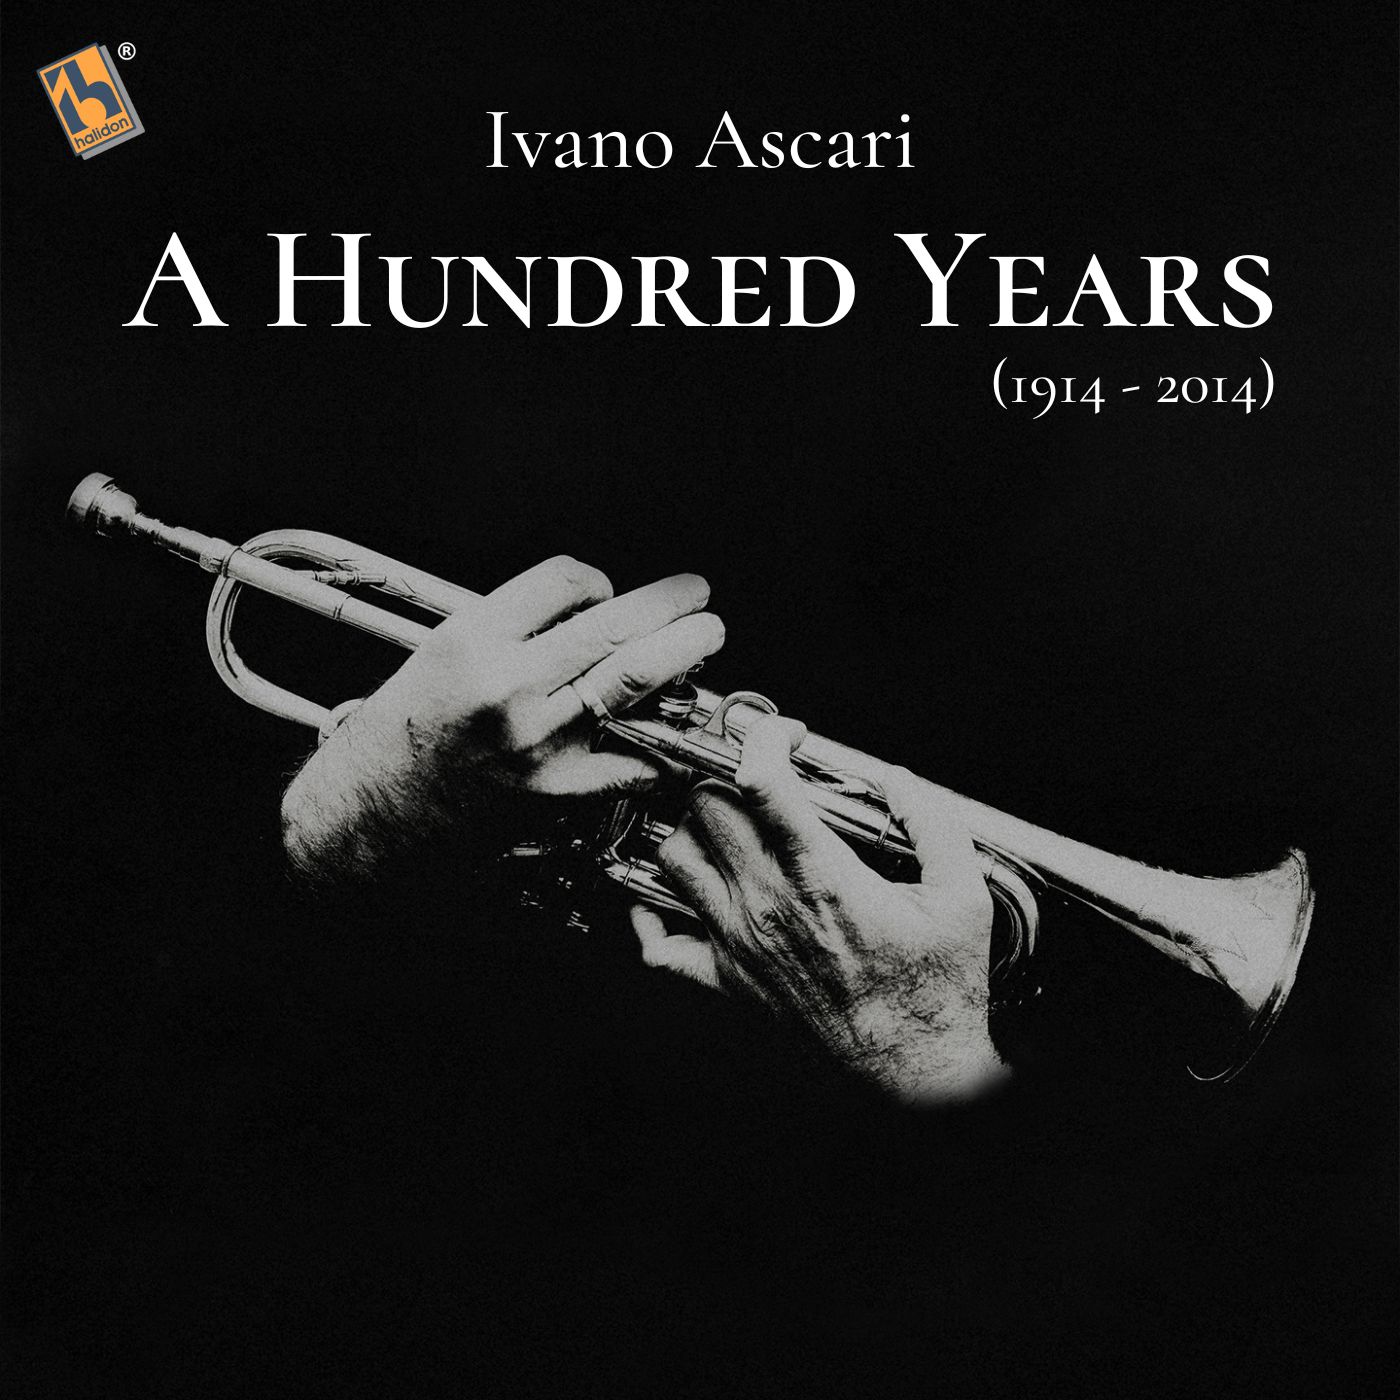 A Hundred Years (1914 - 2014)